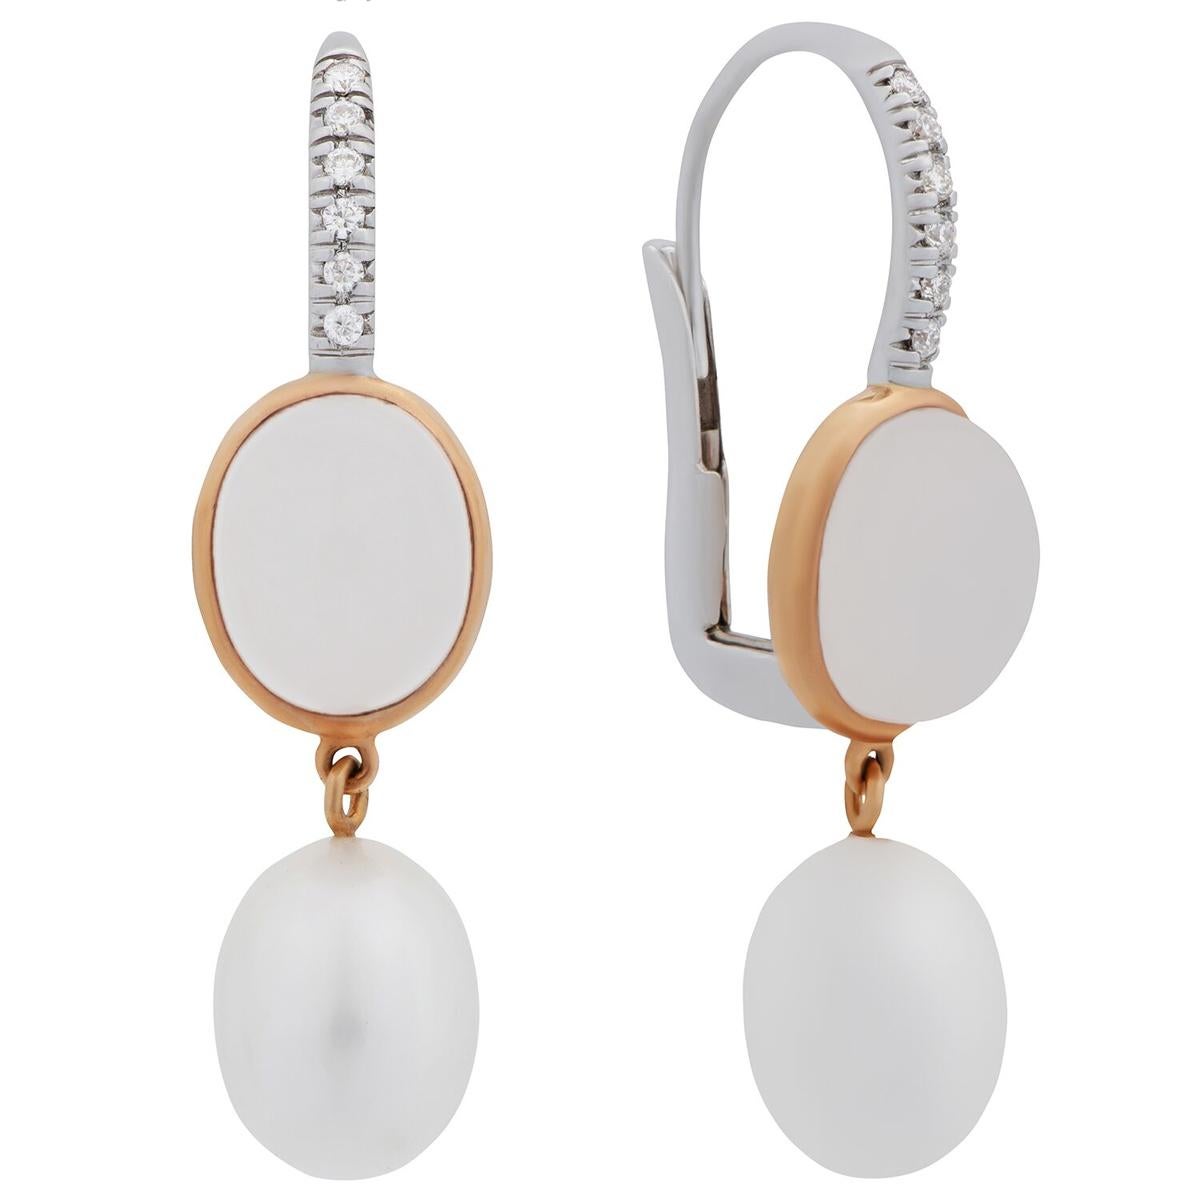 A fabulous pair of Mimi Milano earrings featuring 6.72cts of milky quartz, complemented with 8mm freshwater pearls in 18k white gold and rose gold.